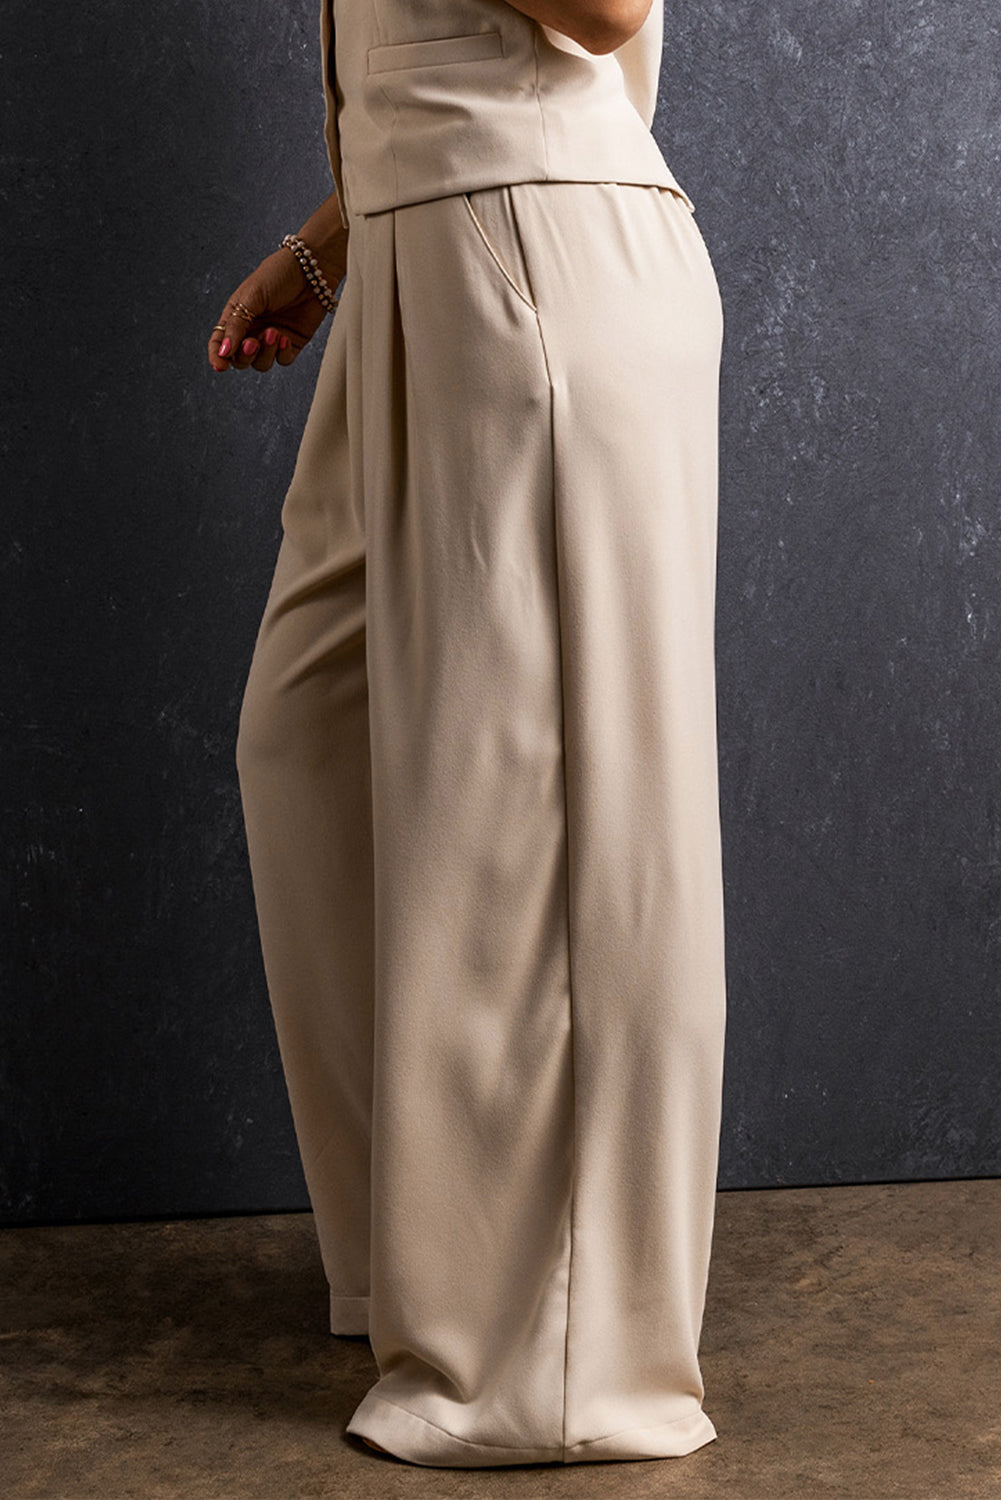 Ruched Wide Leg Pants with Pockets Pants